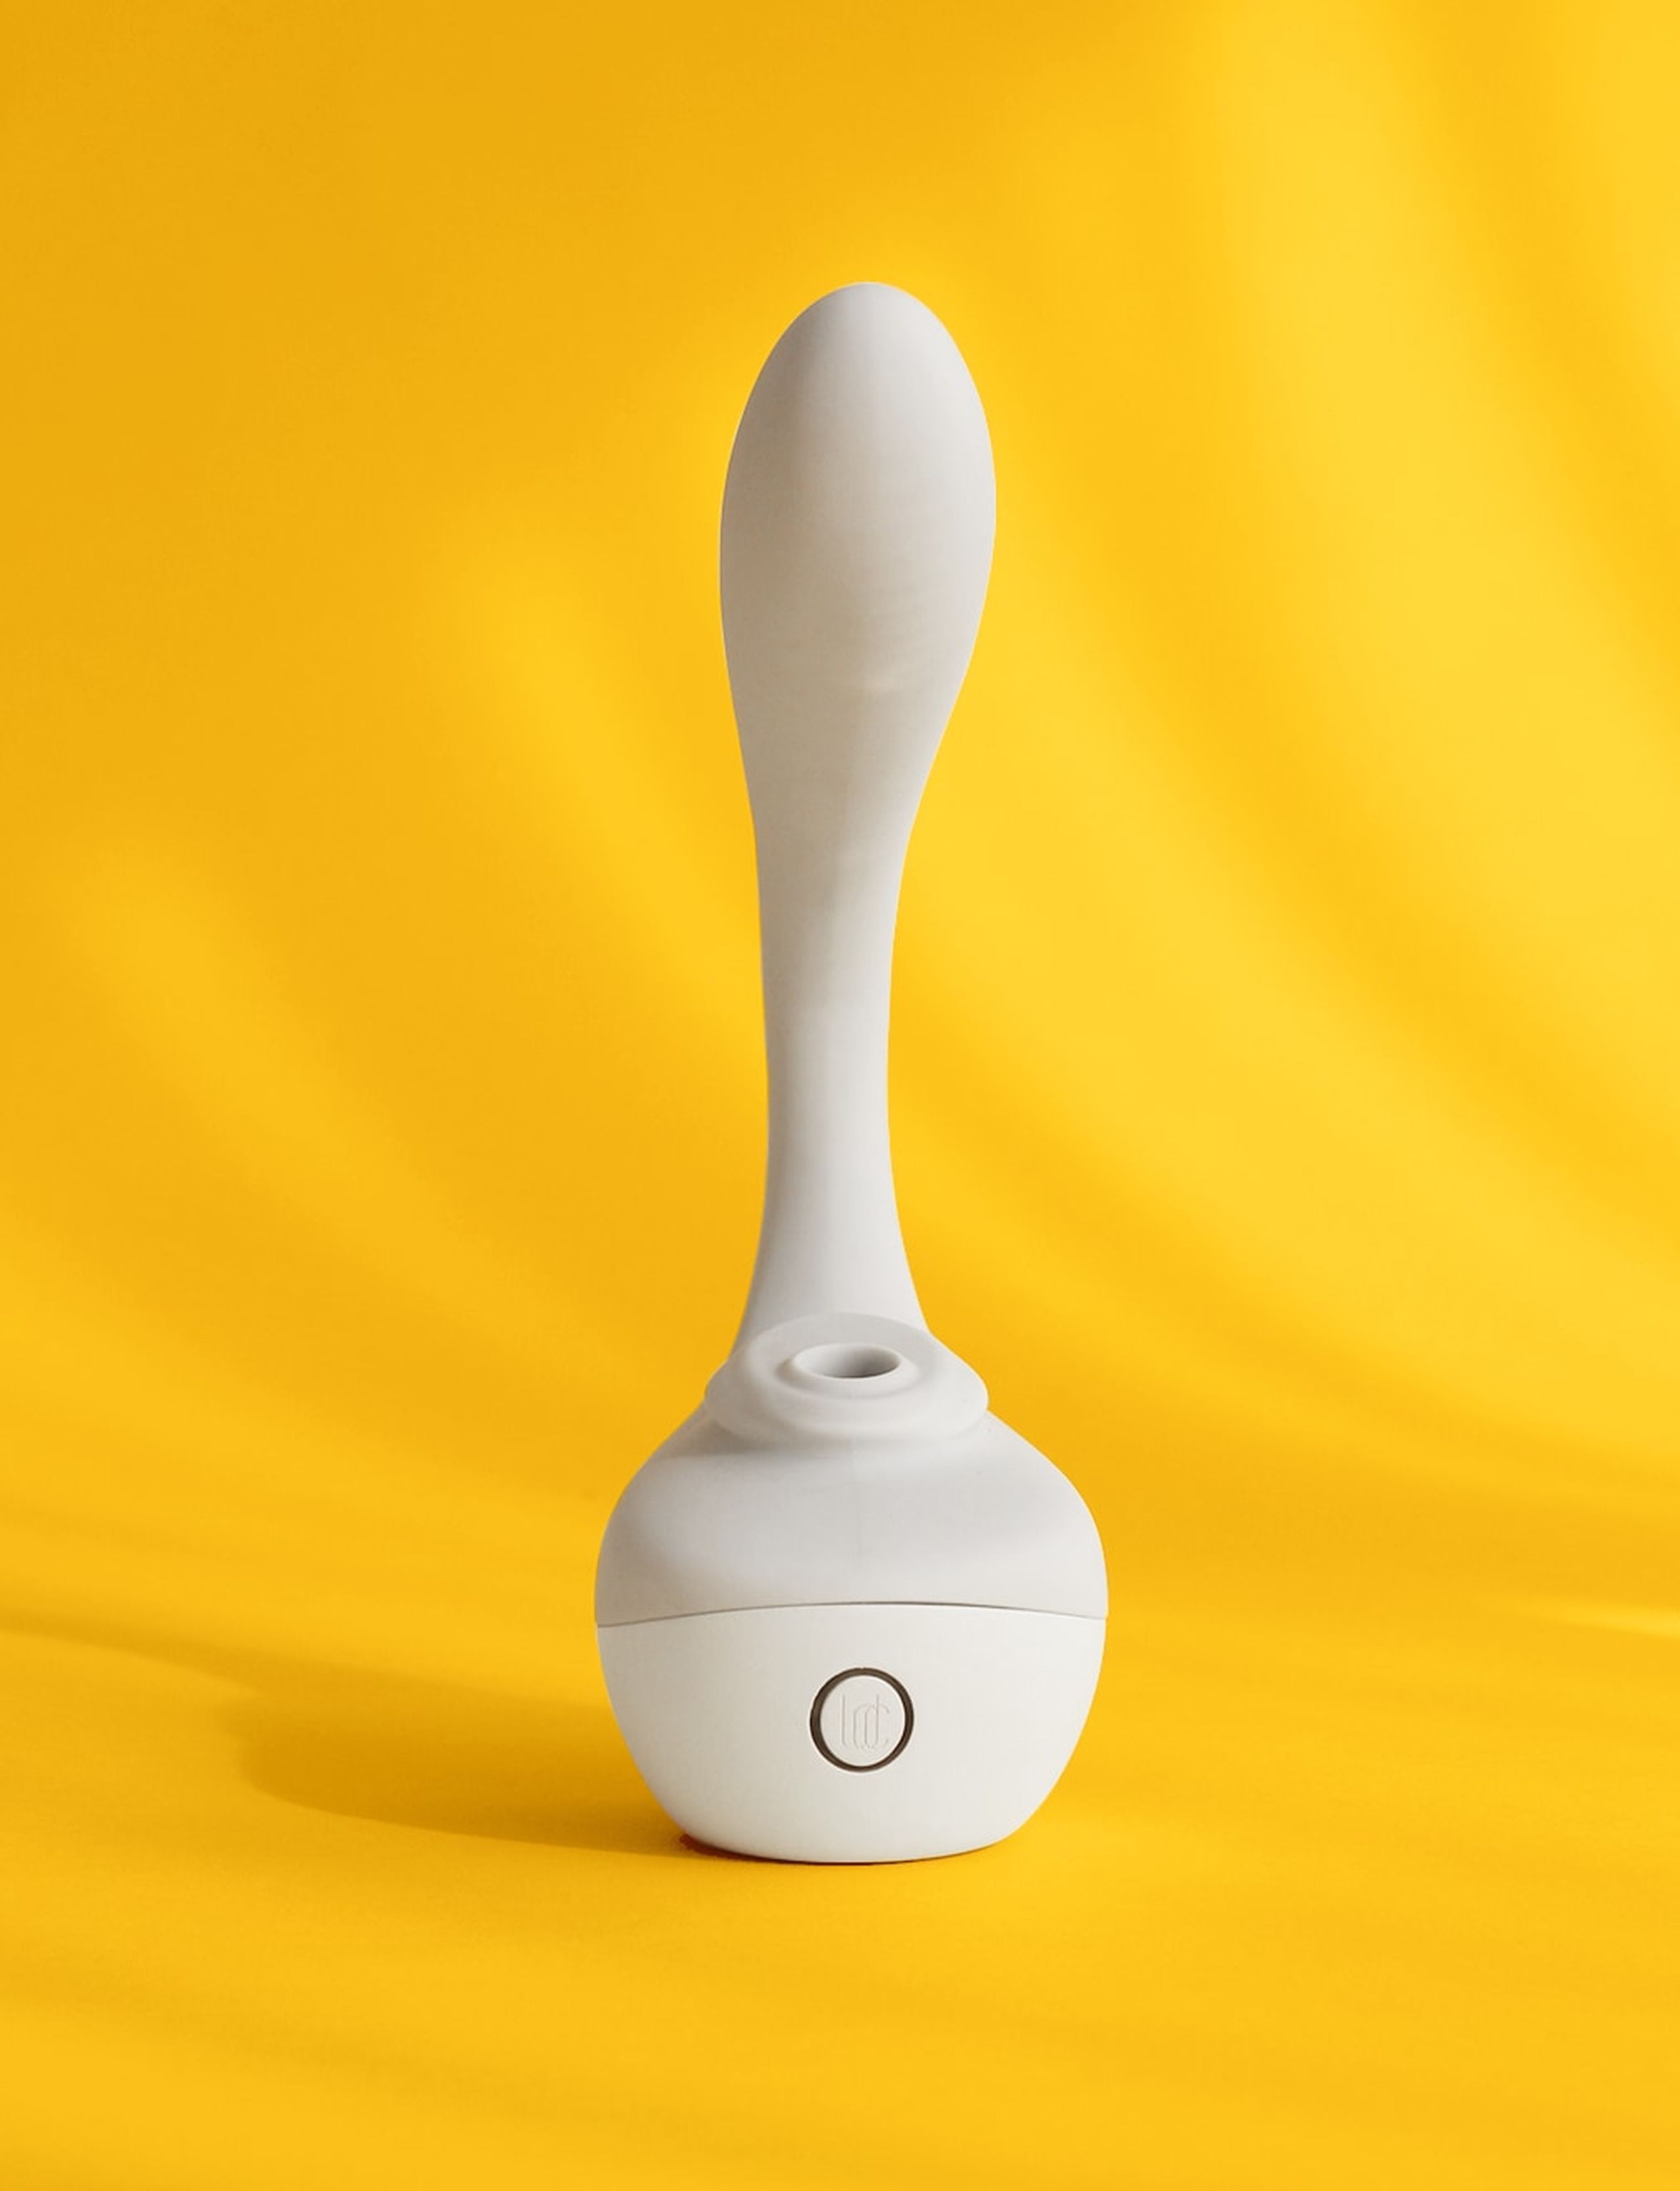 Lora DiCarlo Ose Sex Toy Is Available for Preorder Shape